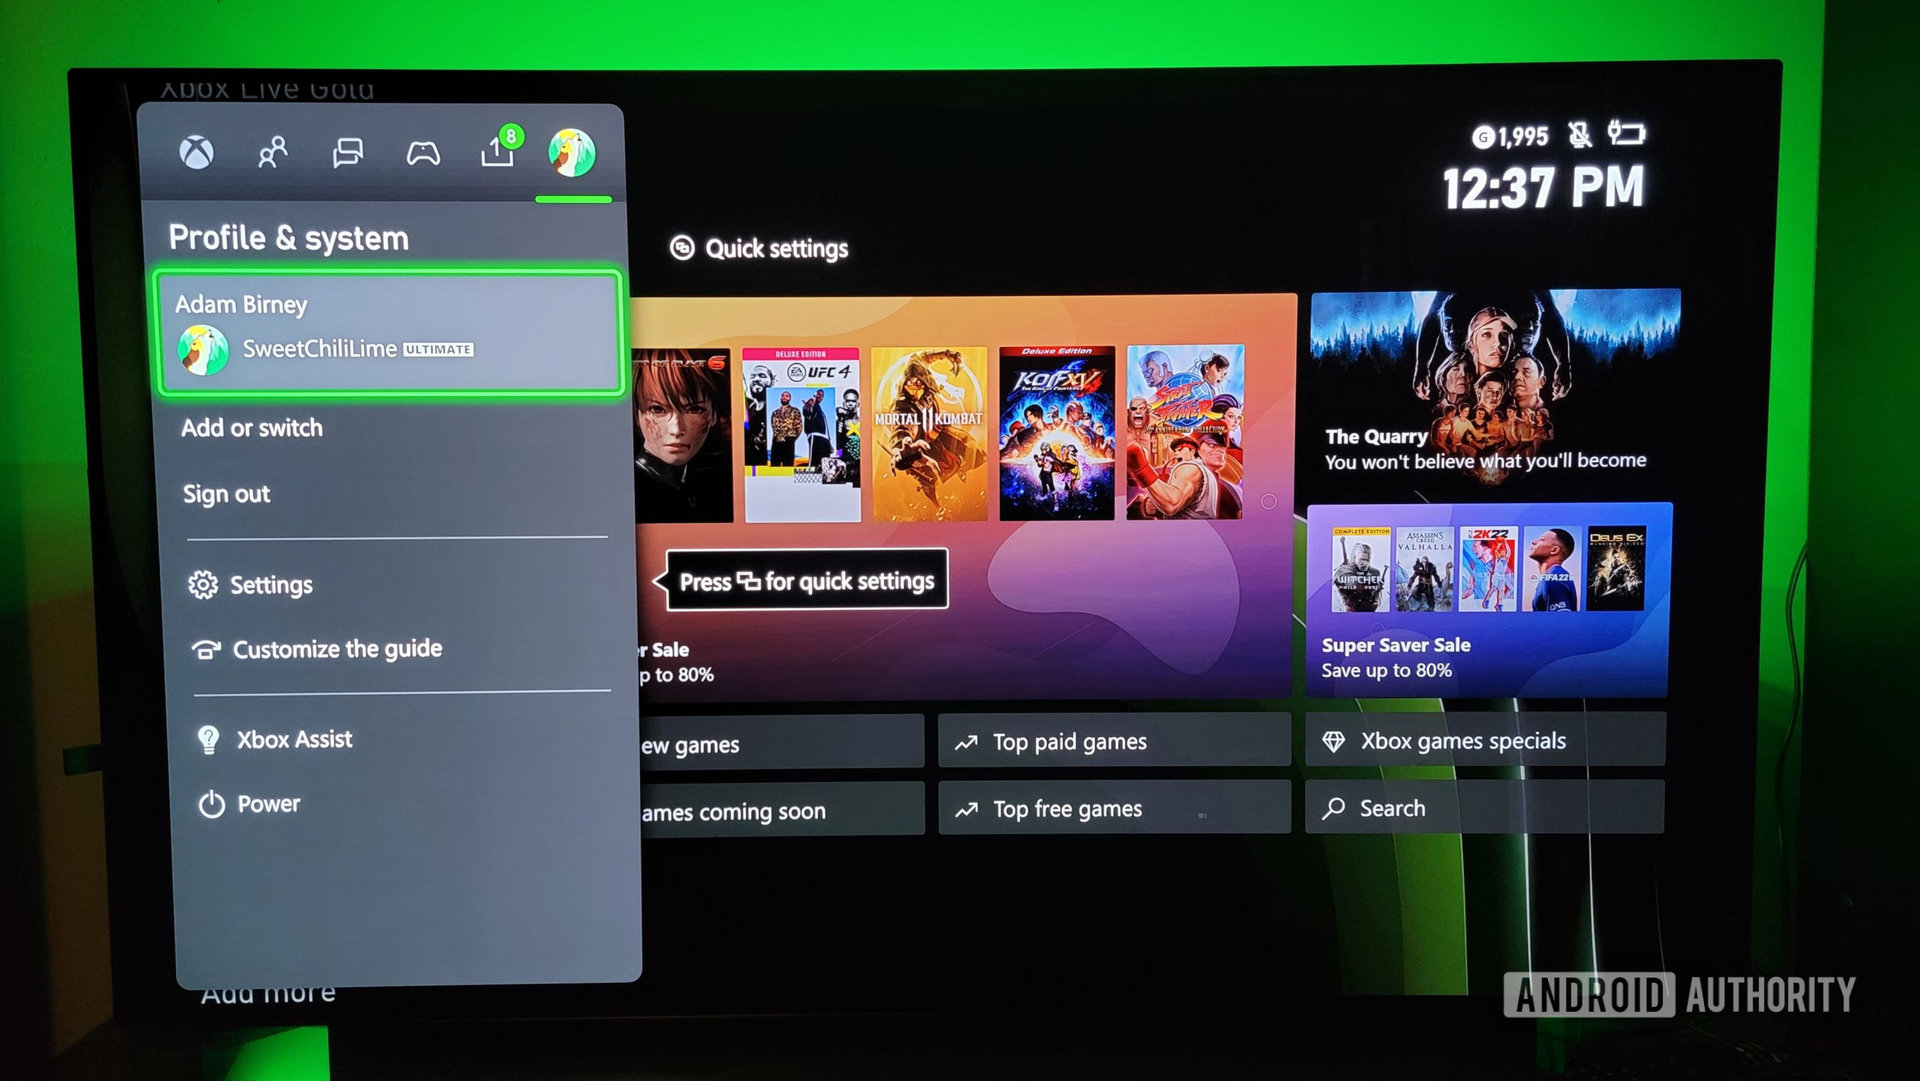 rok openbaar hardware How to change your Xbox Gamertag - Android Authority